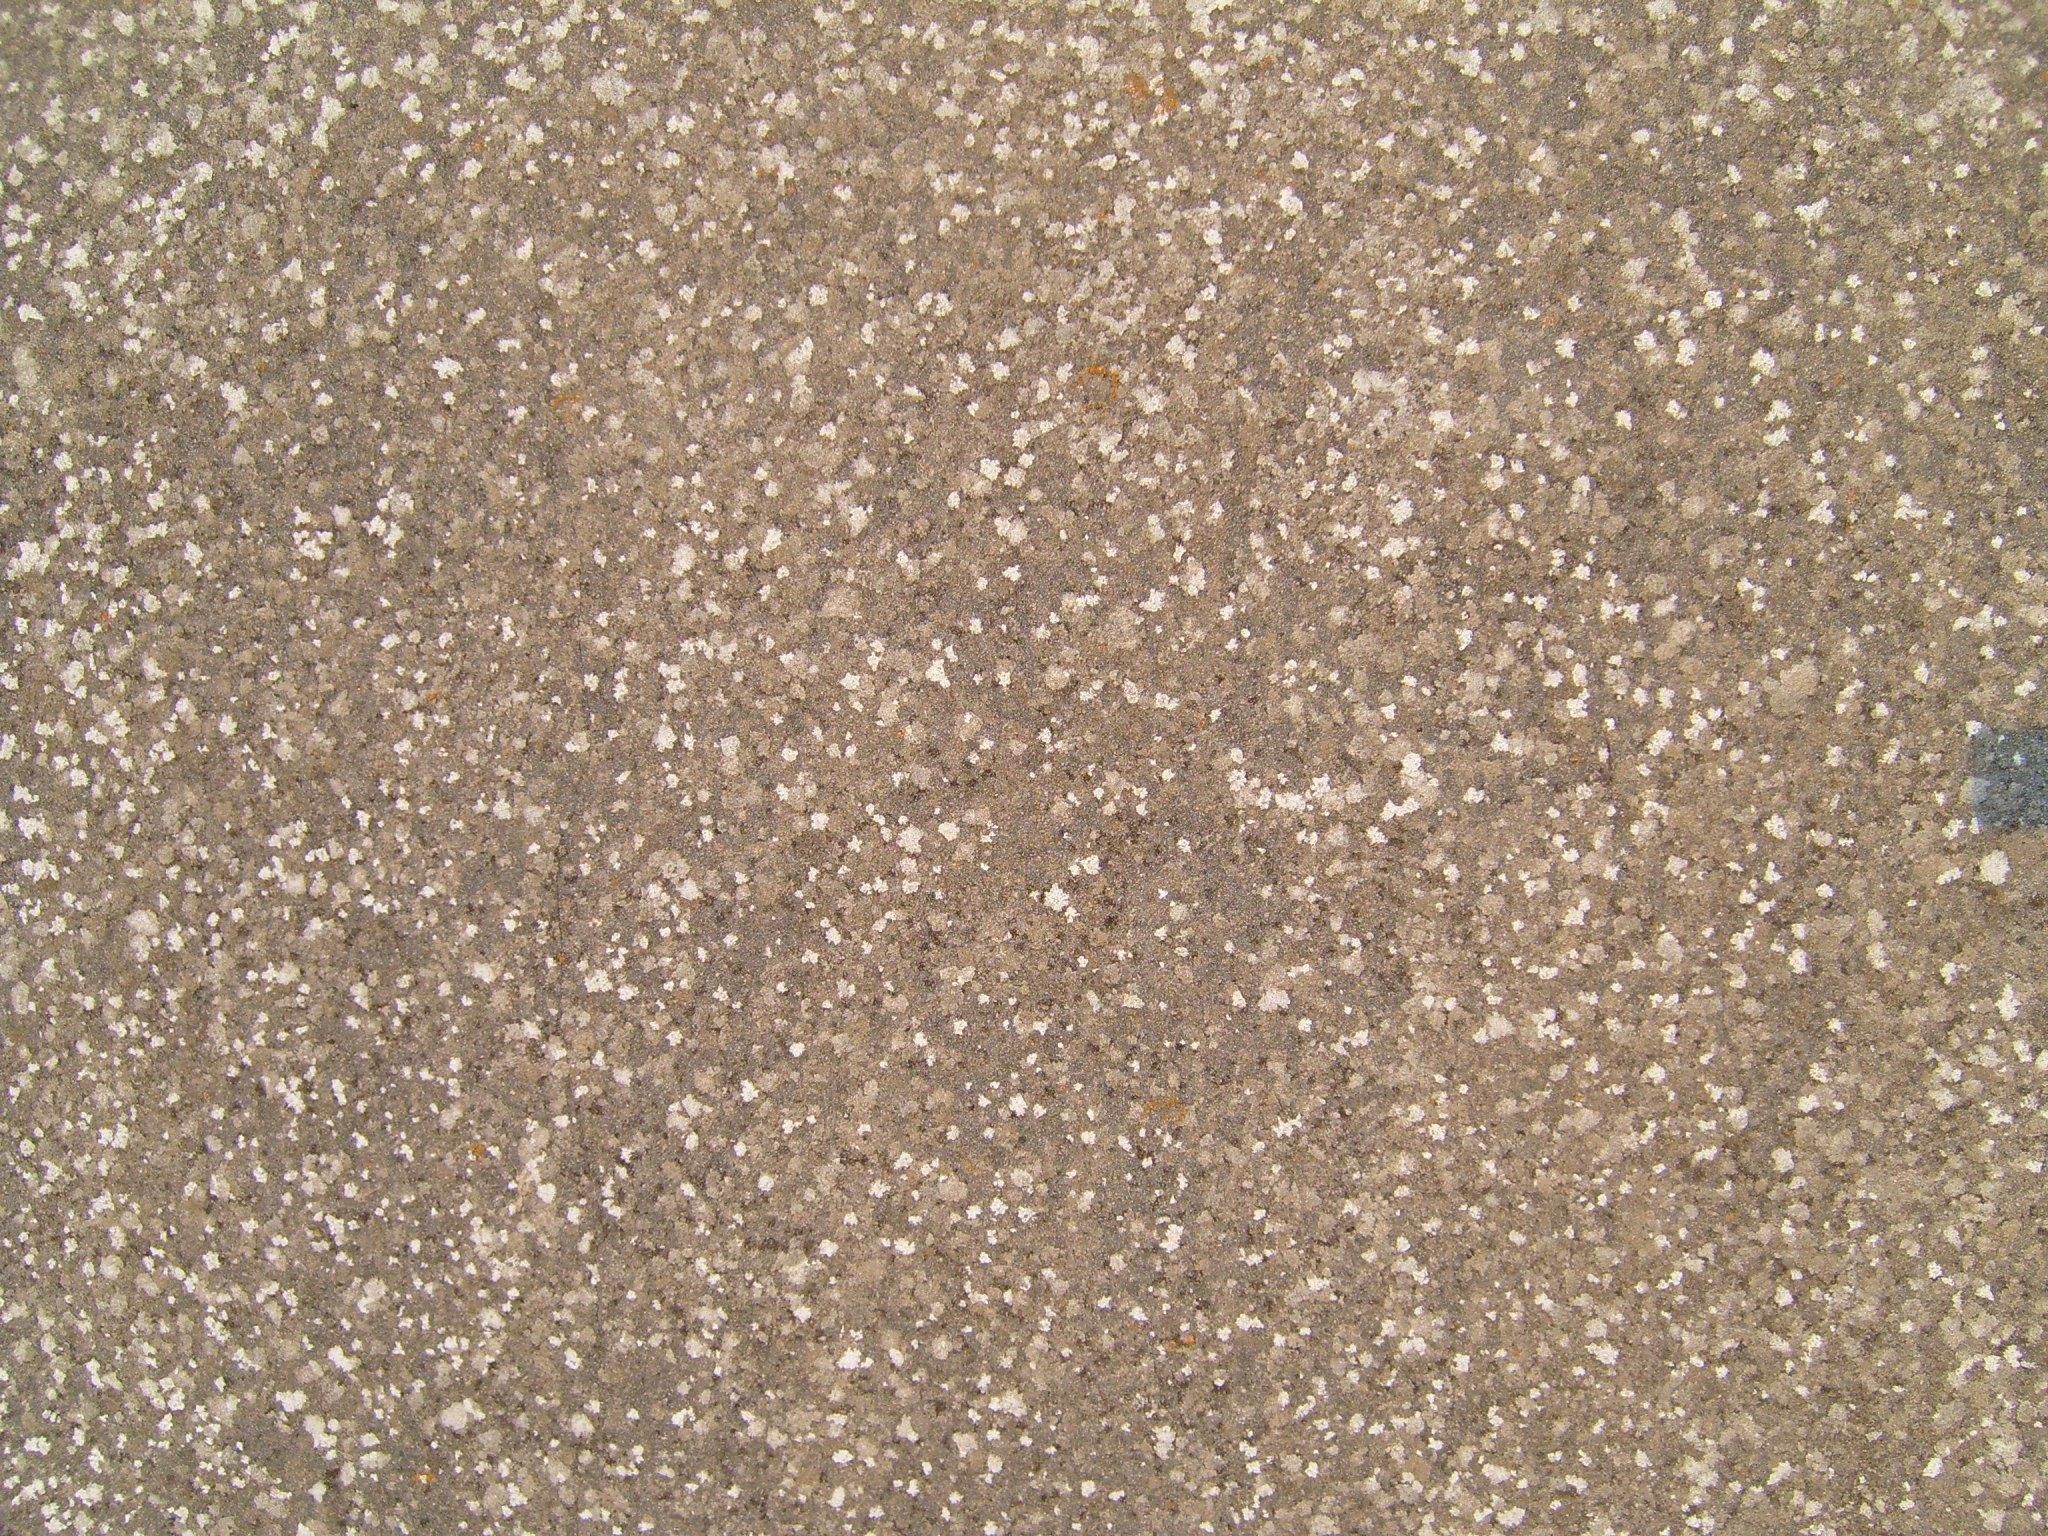 File:Stone surface with lichens.jpg - Wikimedia Commons